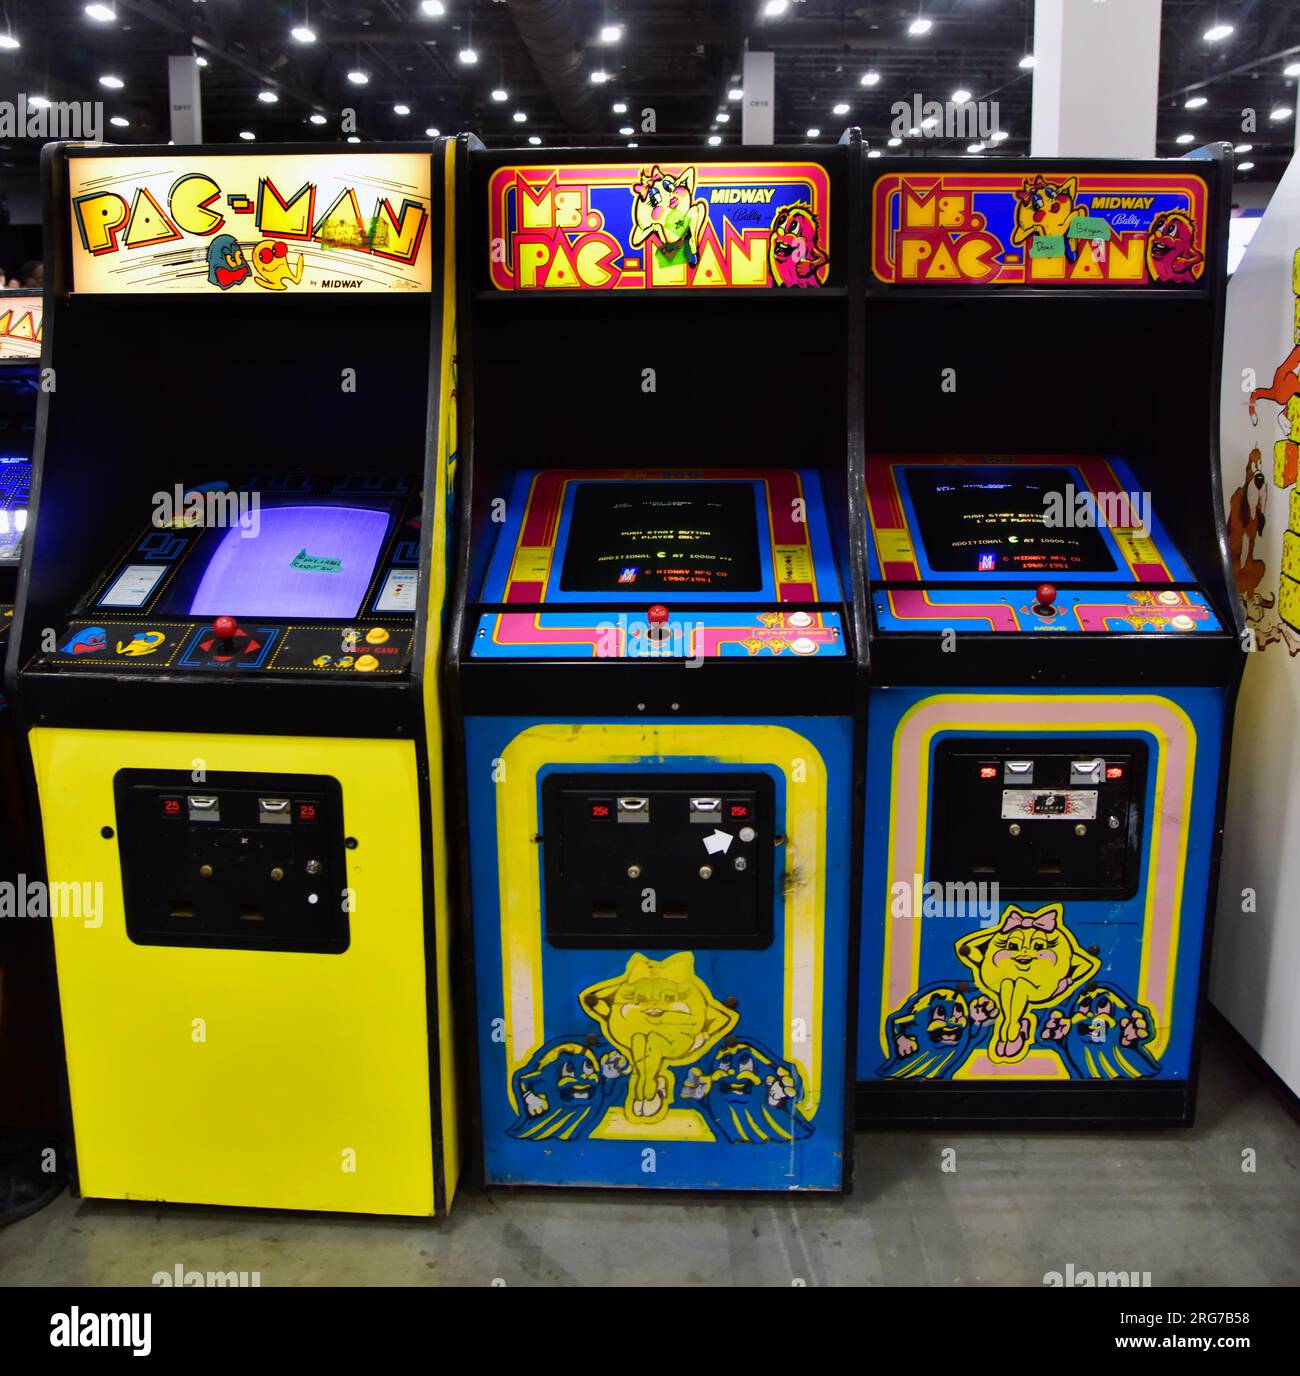 Pac-Man and Ms Pac-Man Arcade Games. Stock Photo